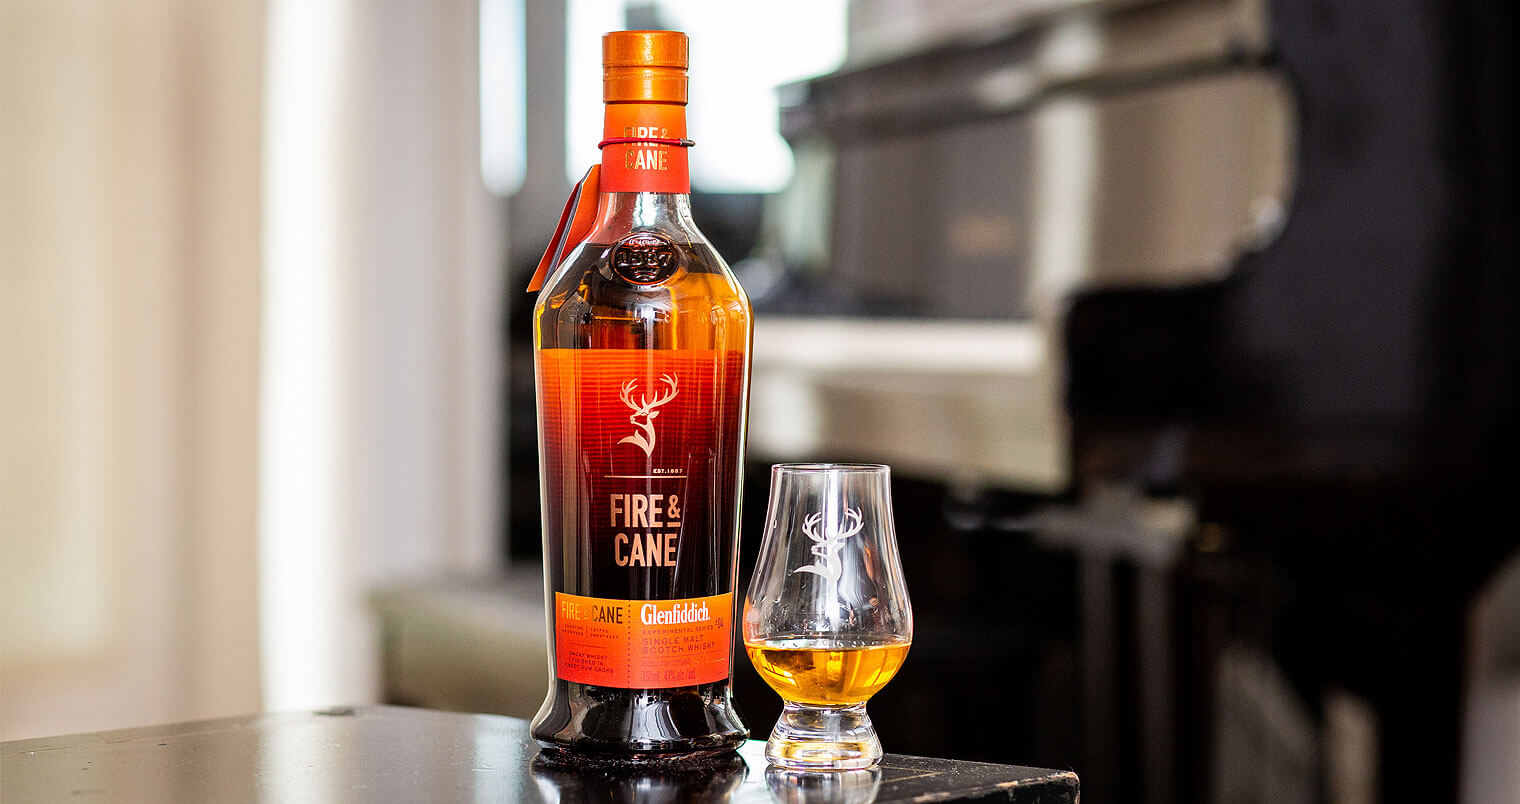 Glenfiddich Fire & Cane, featured image